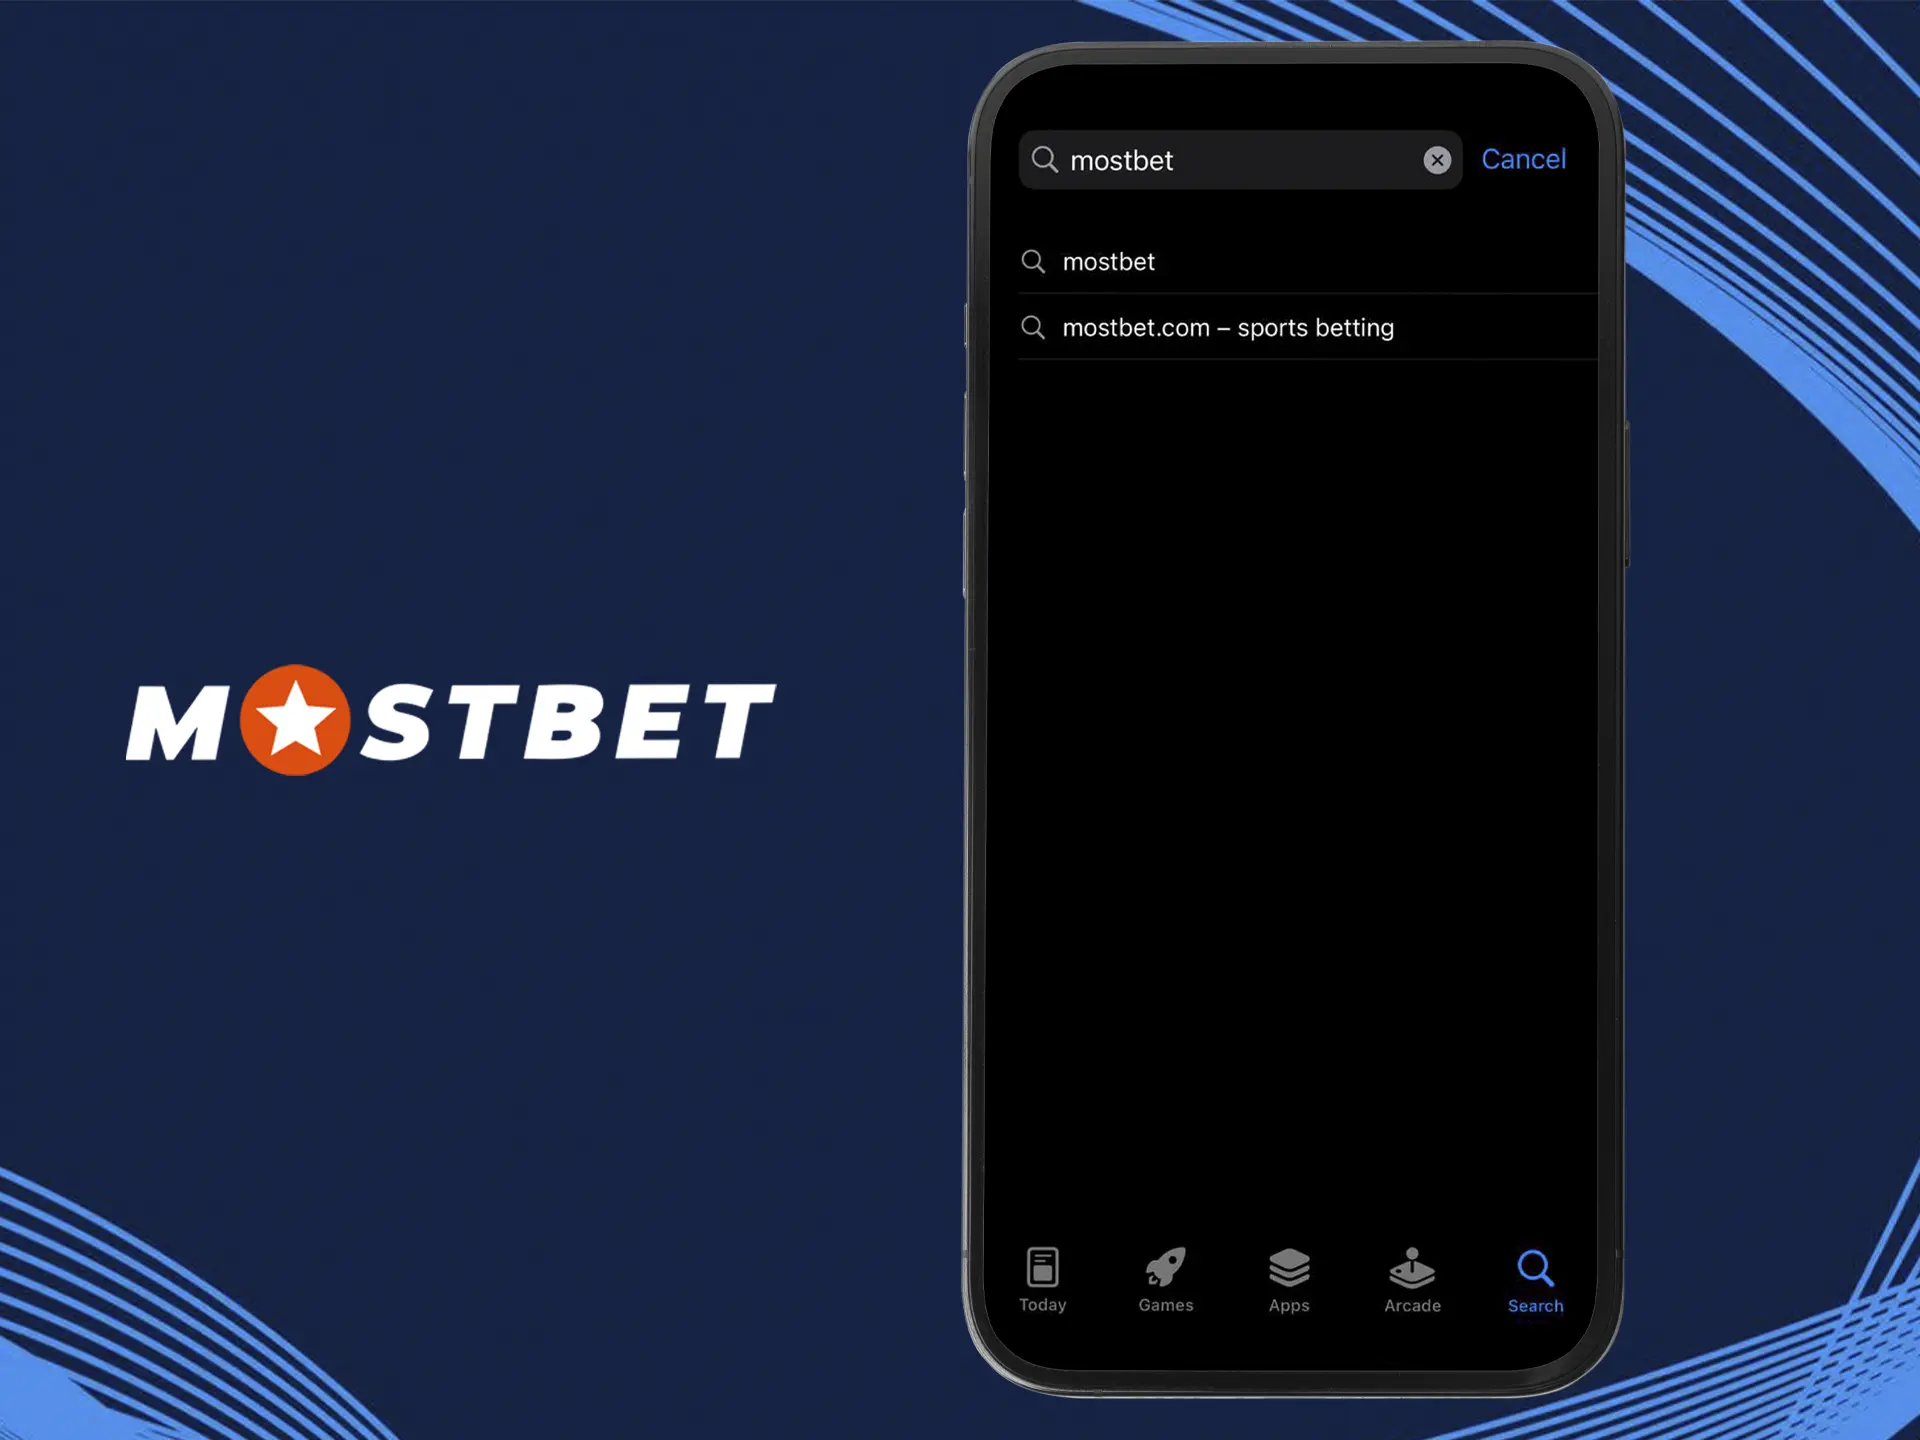 Use the search bar to find the Mostbet app quickly and easily.